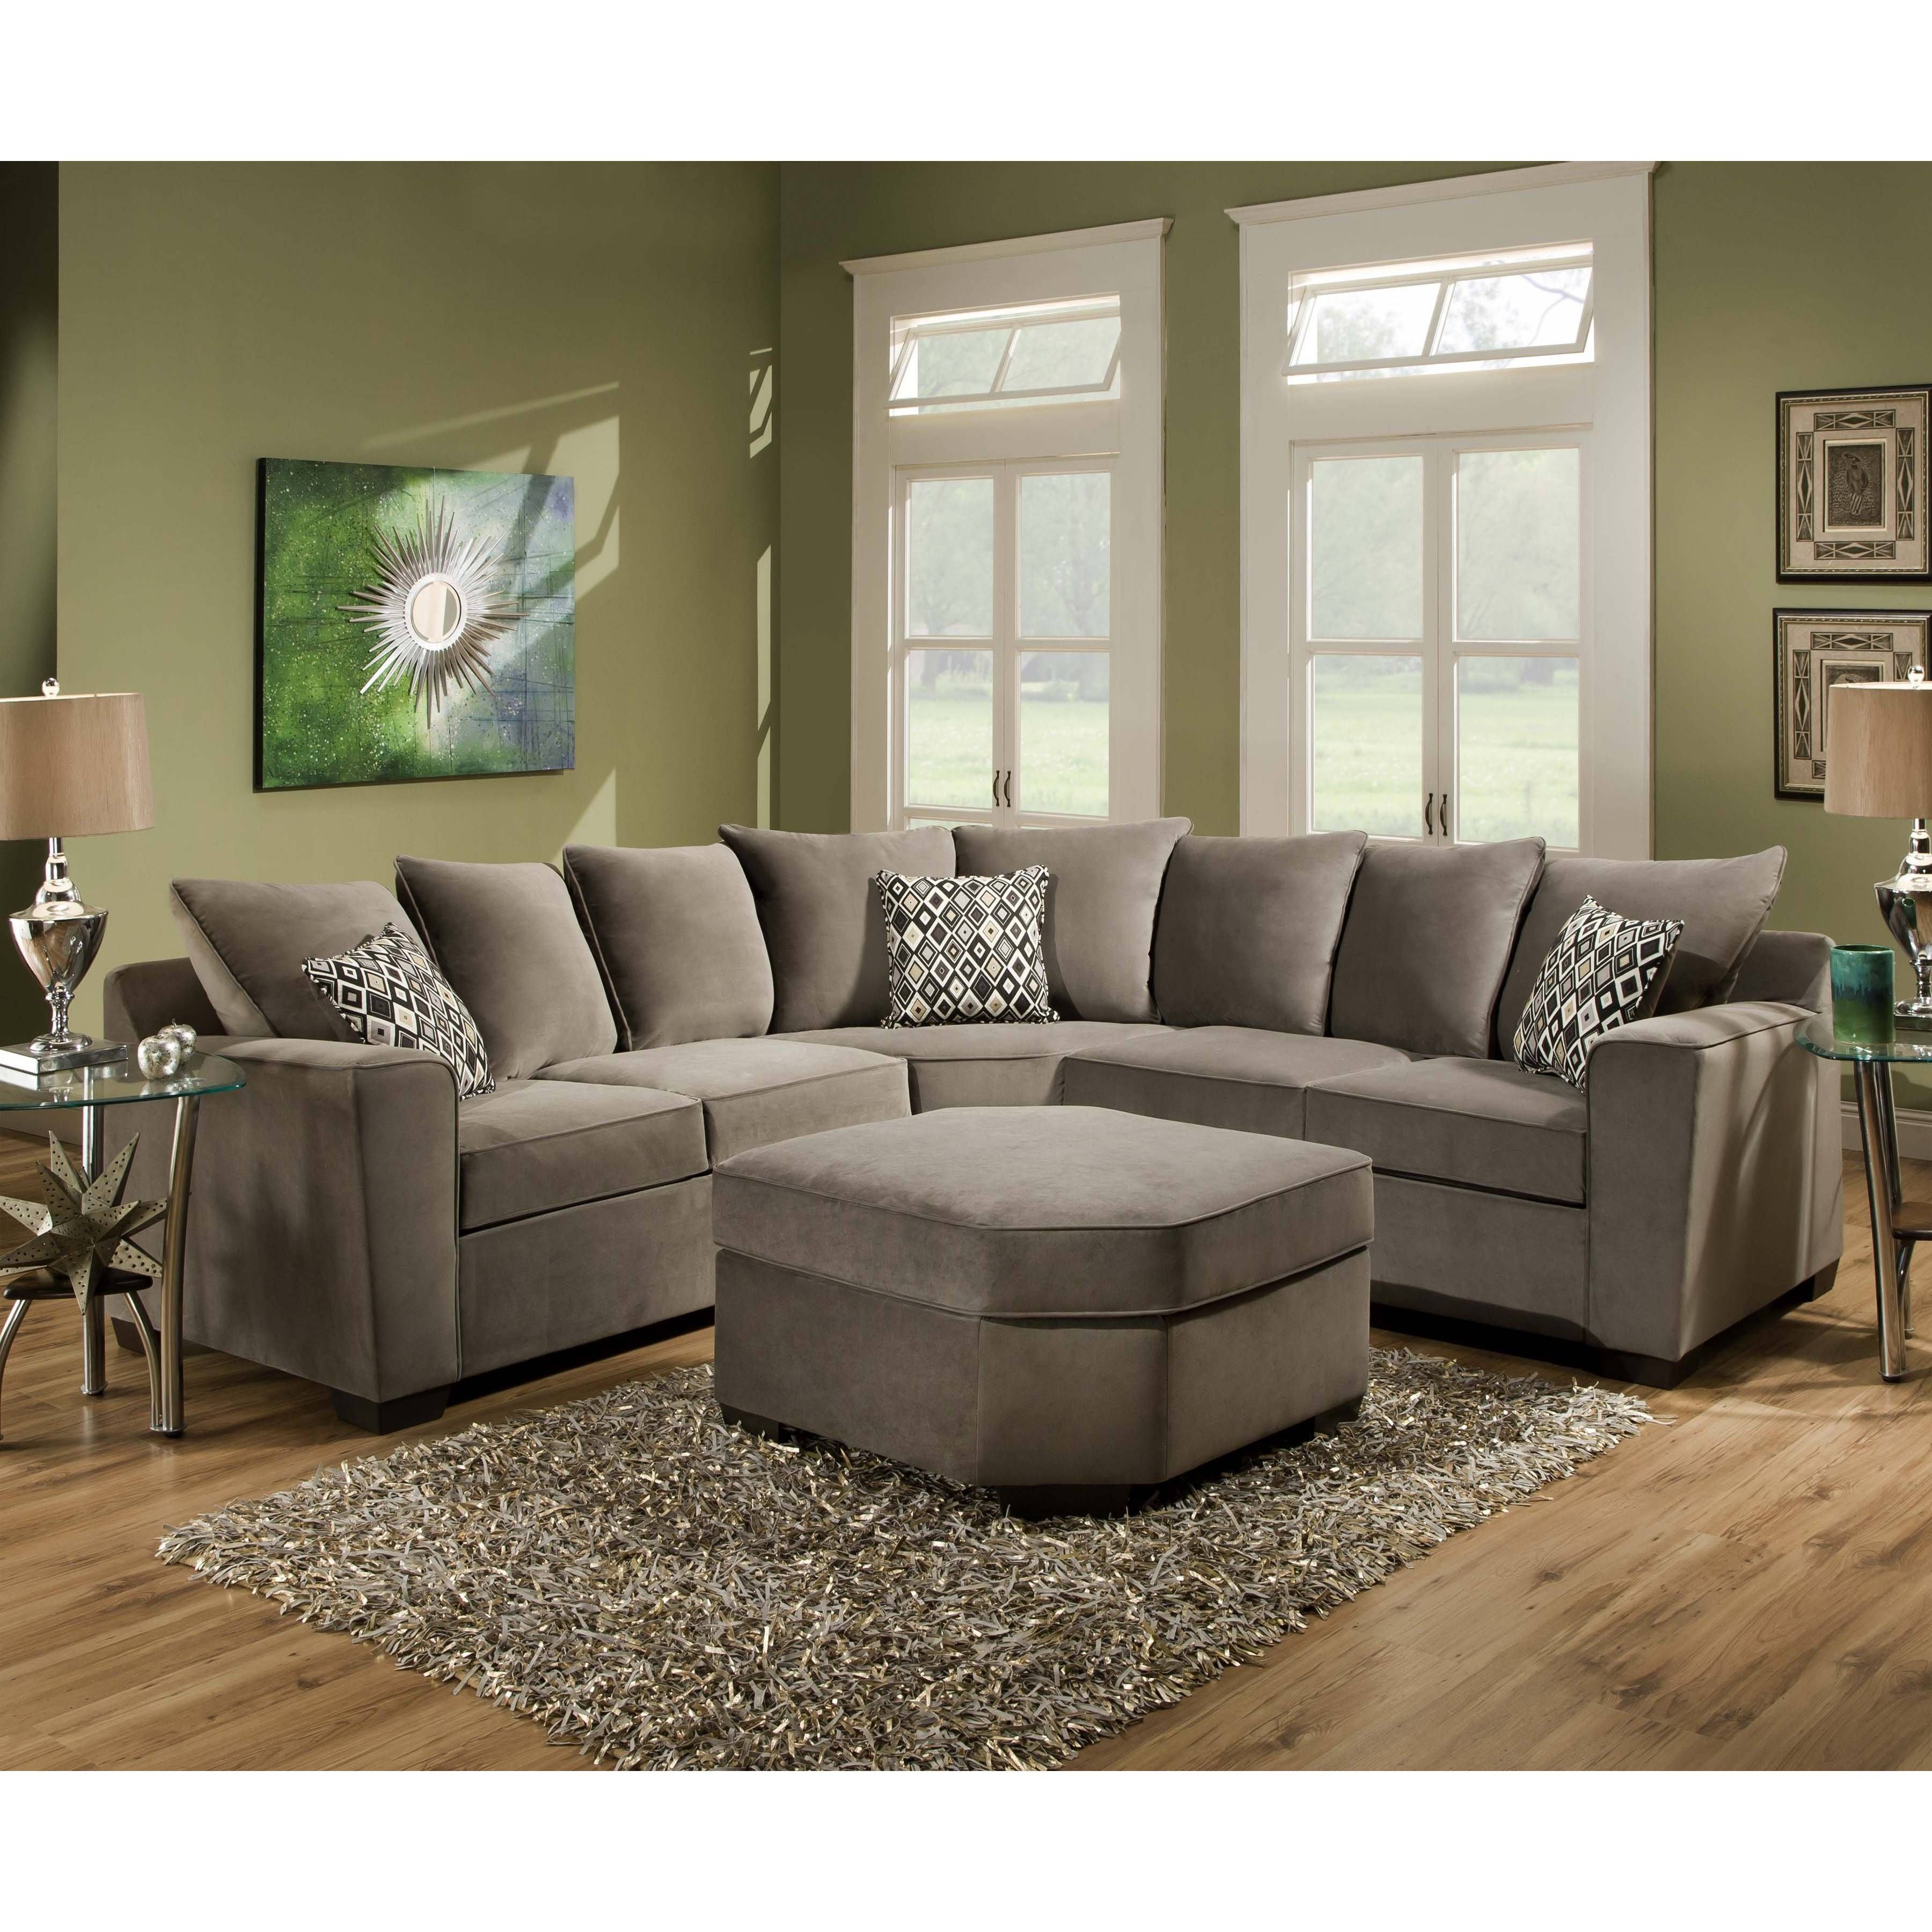 Traditional Sectional Sofas Living Room Furniture – Simoon For Traditional Sectional Sofas Living Room Furniture (View 14 of 25)